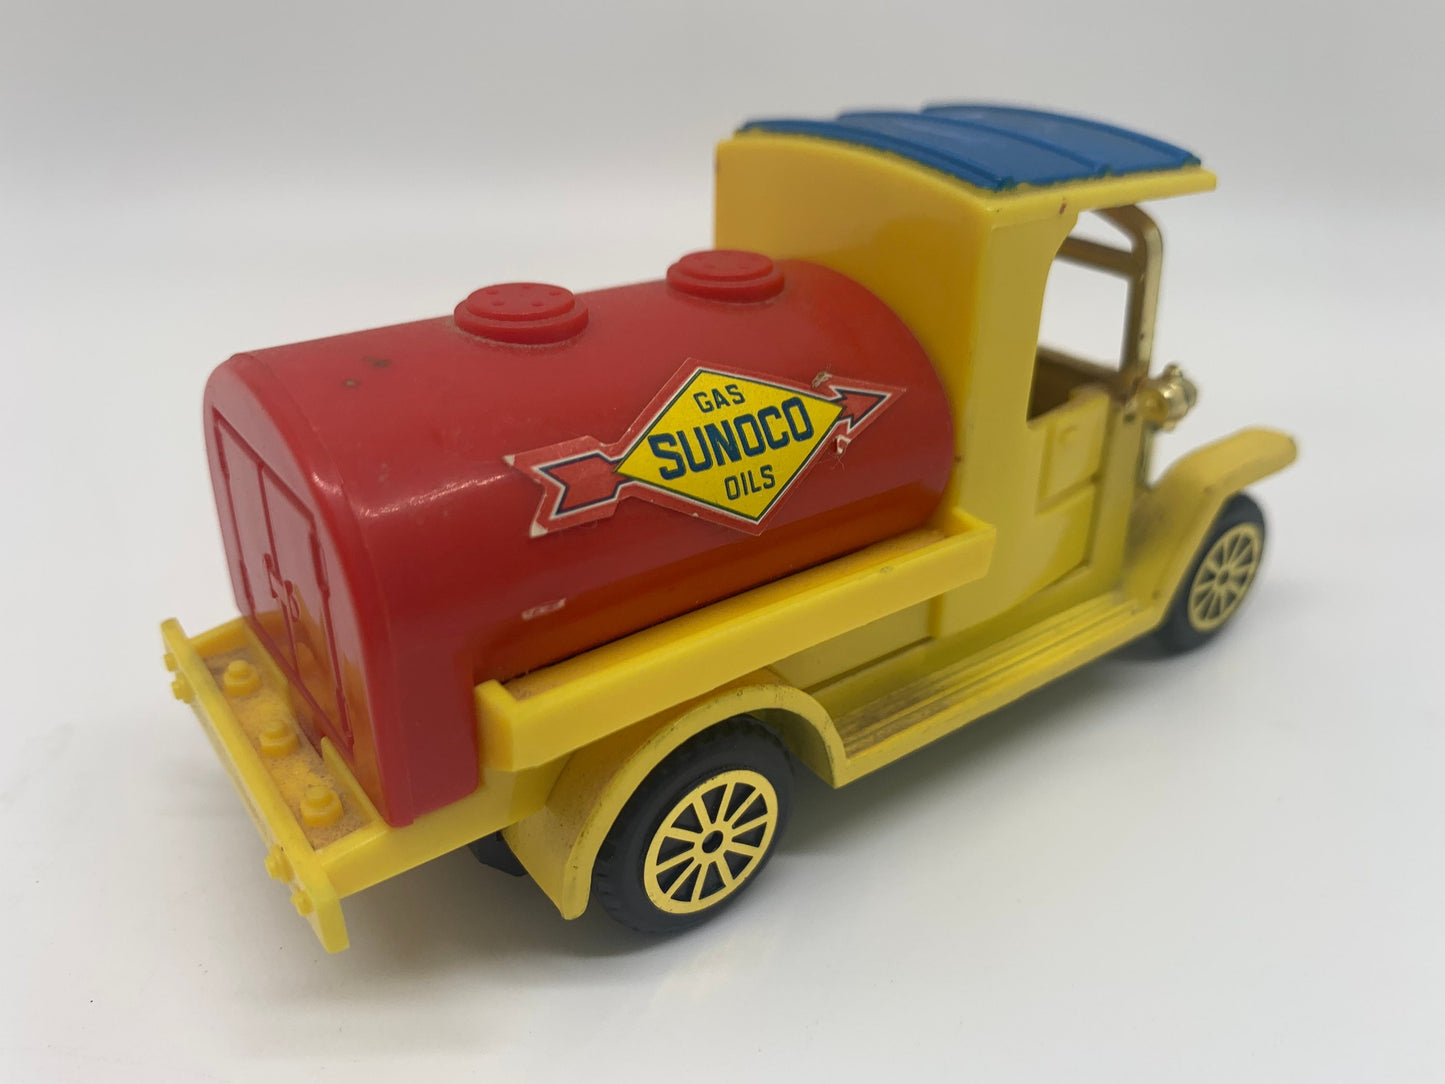 Ford Model T Sunoco Oil Gas Petrol Tanker Truck Yellow Readers Digest Perfect Birthday Gift Collectable Miniature Scale Model Toy Car